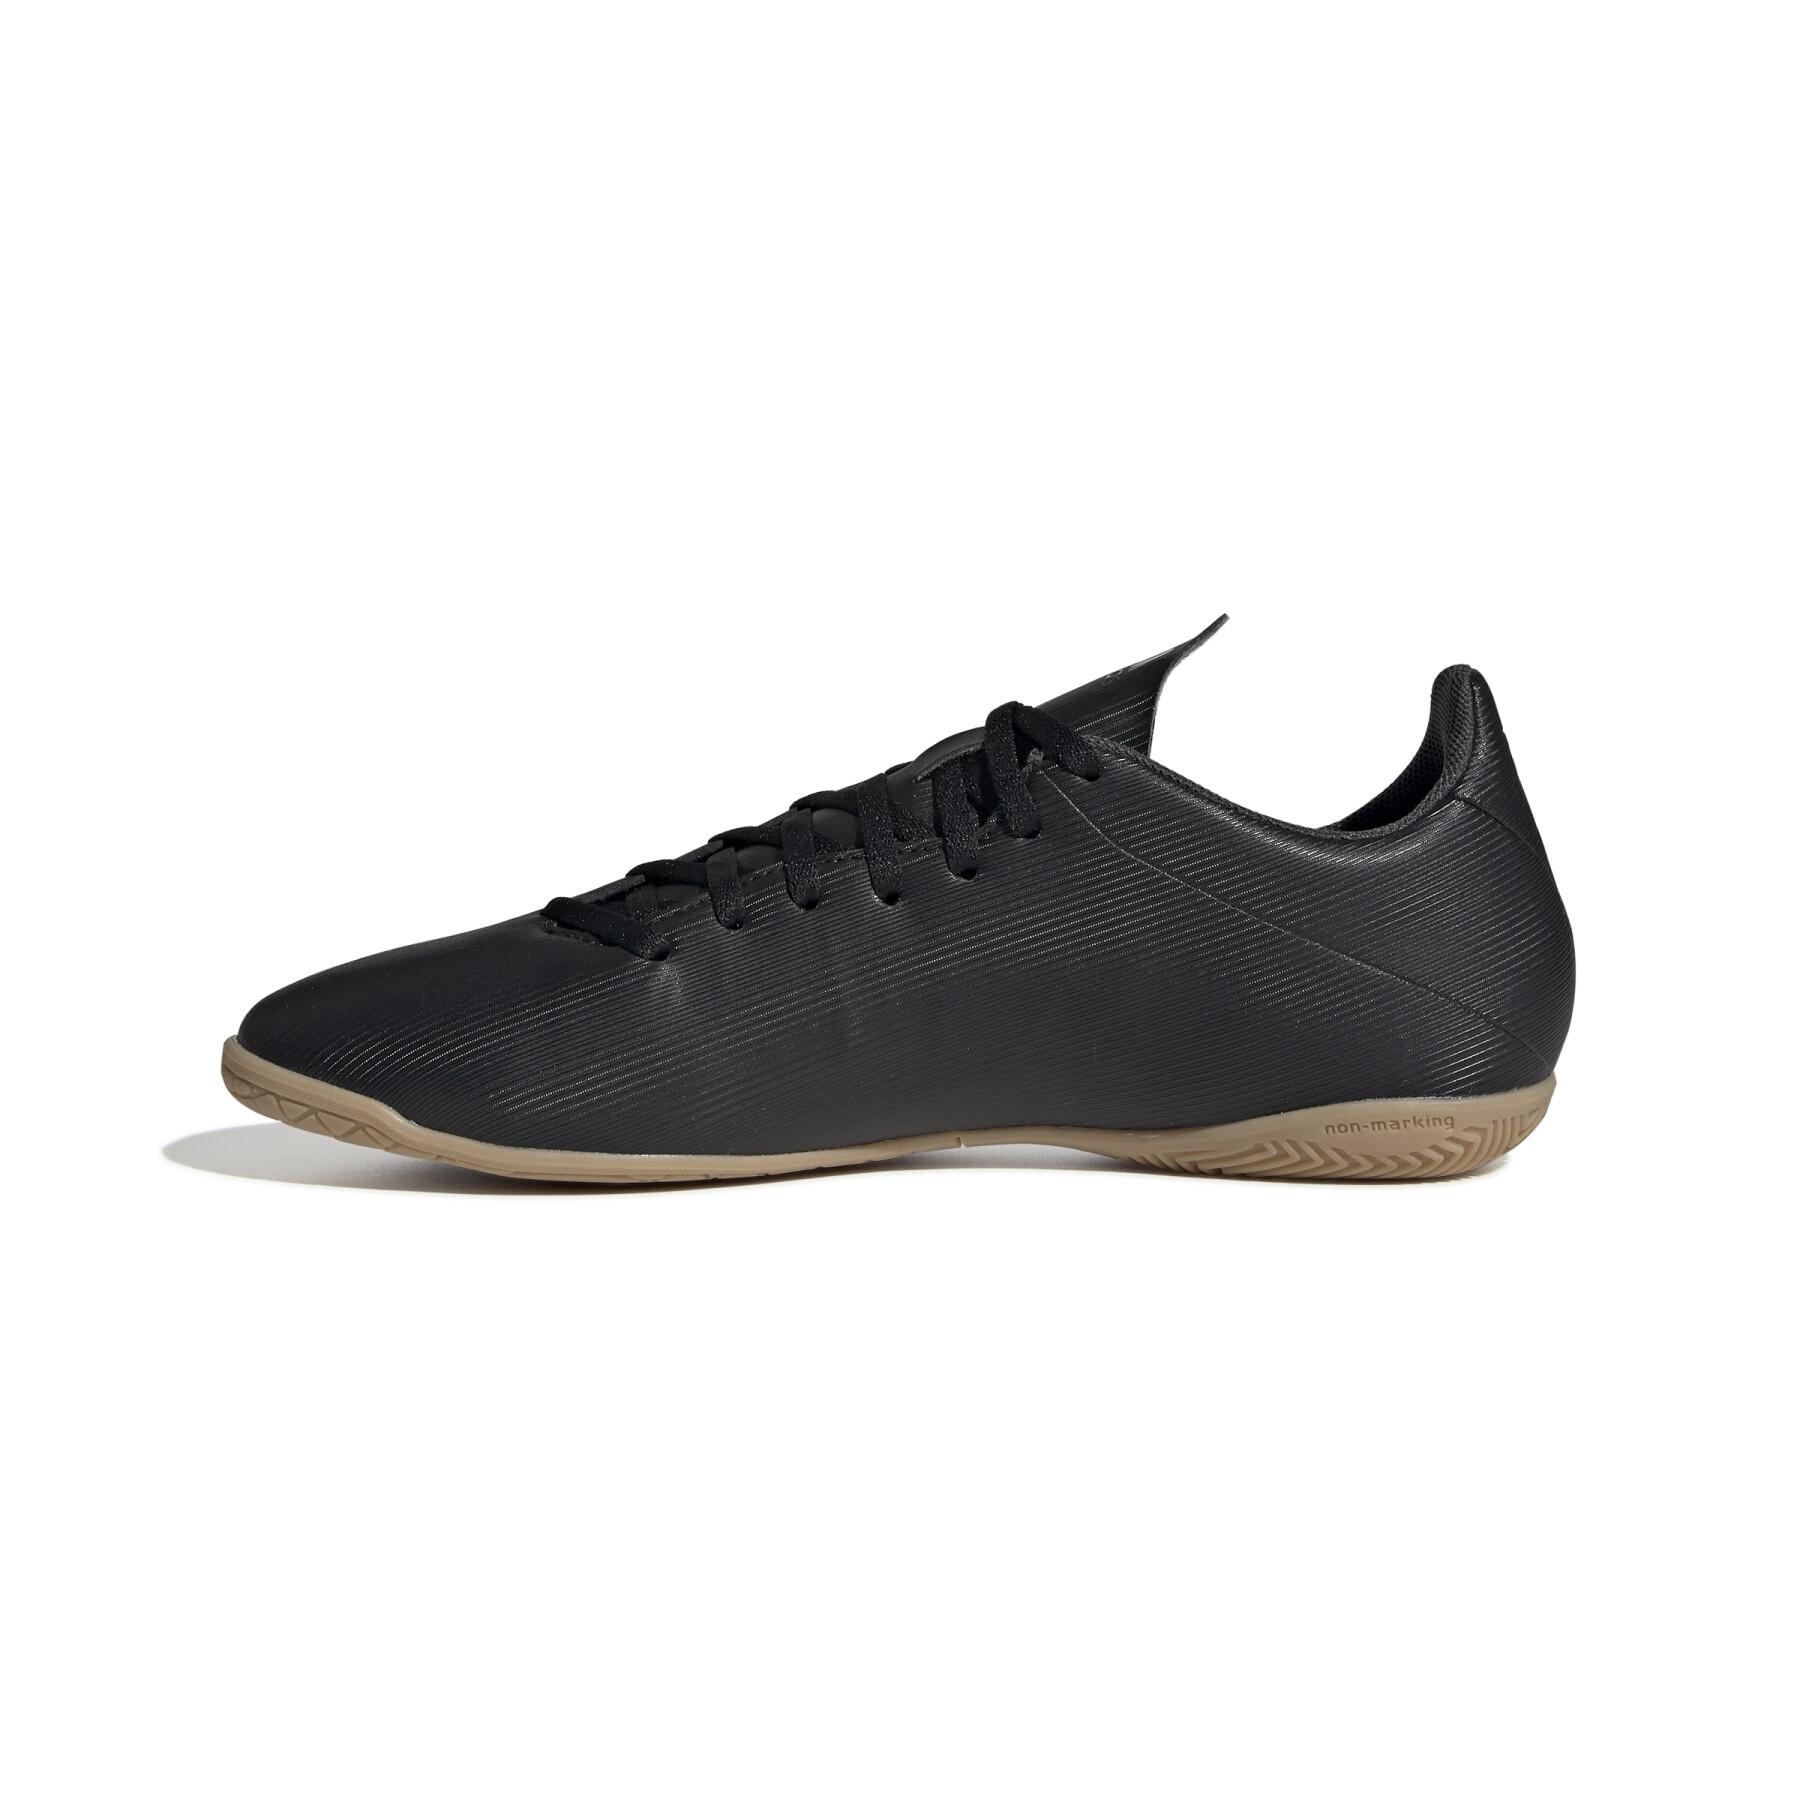 Soccer shoes adidas X 19.4 IC